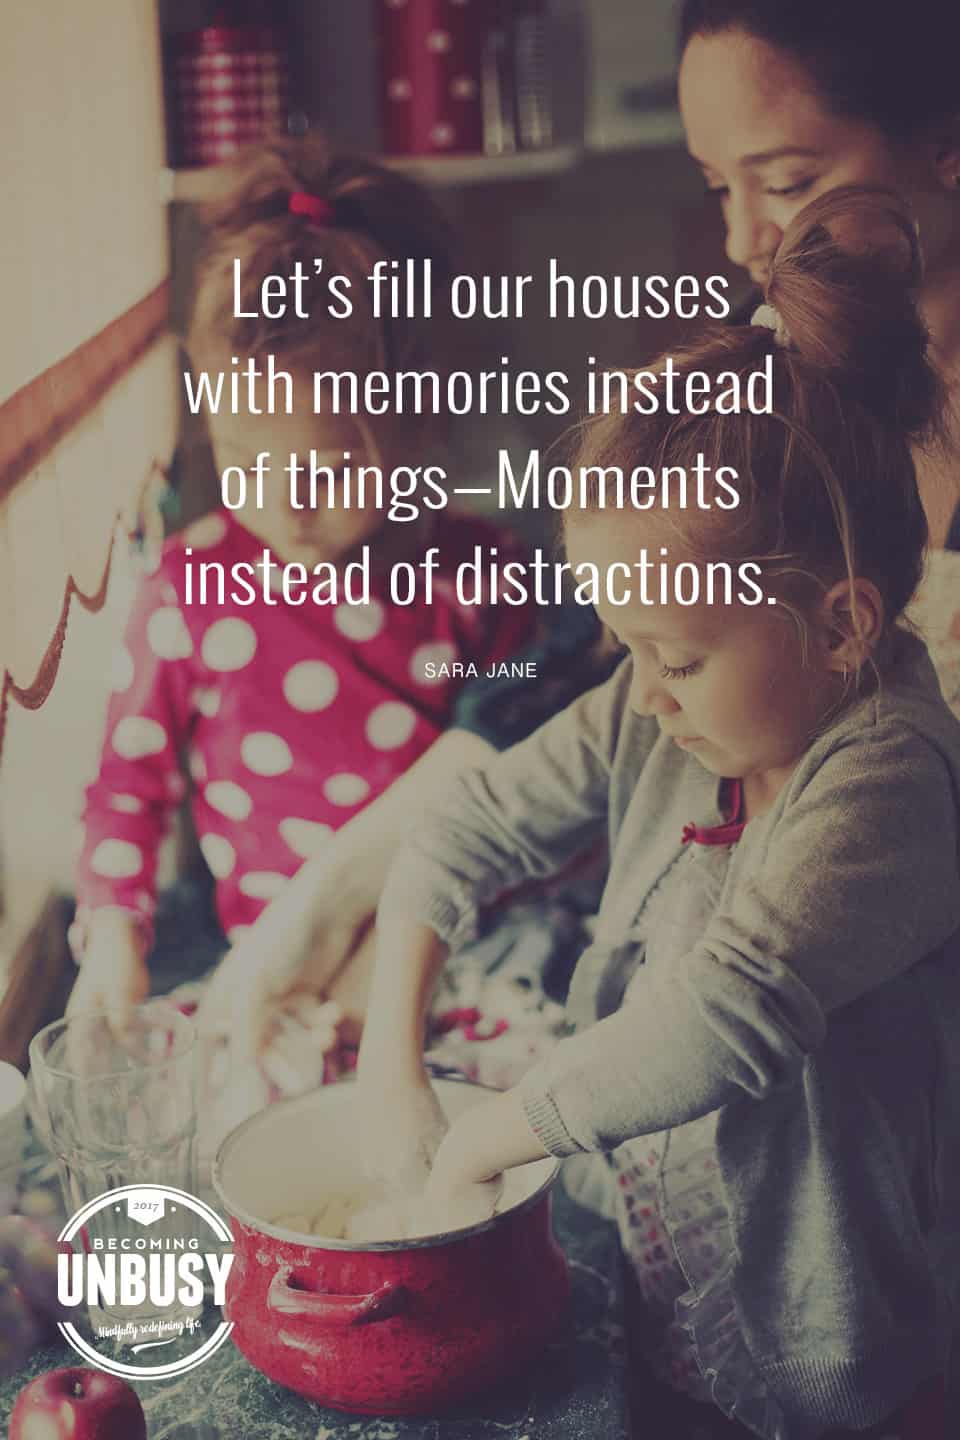 Let's fill our houses with memories instead of things - moments instead of distractions. #minimalism #lessstuff #peopleoverthings #quote #modernparenting *Loving this quote and this article!